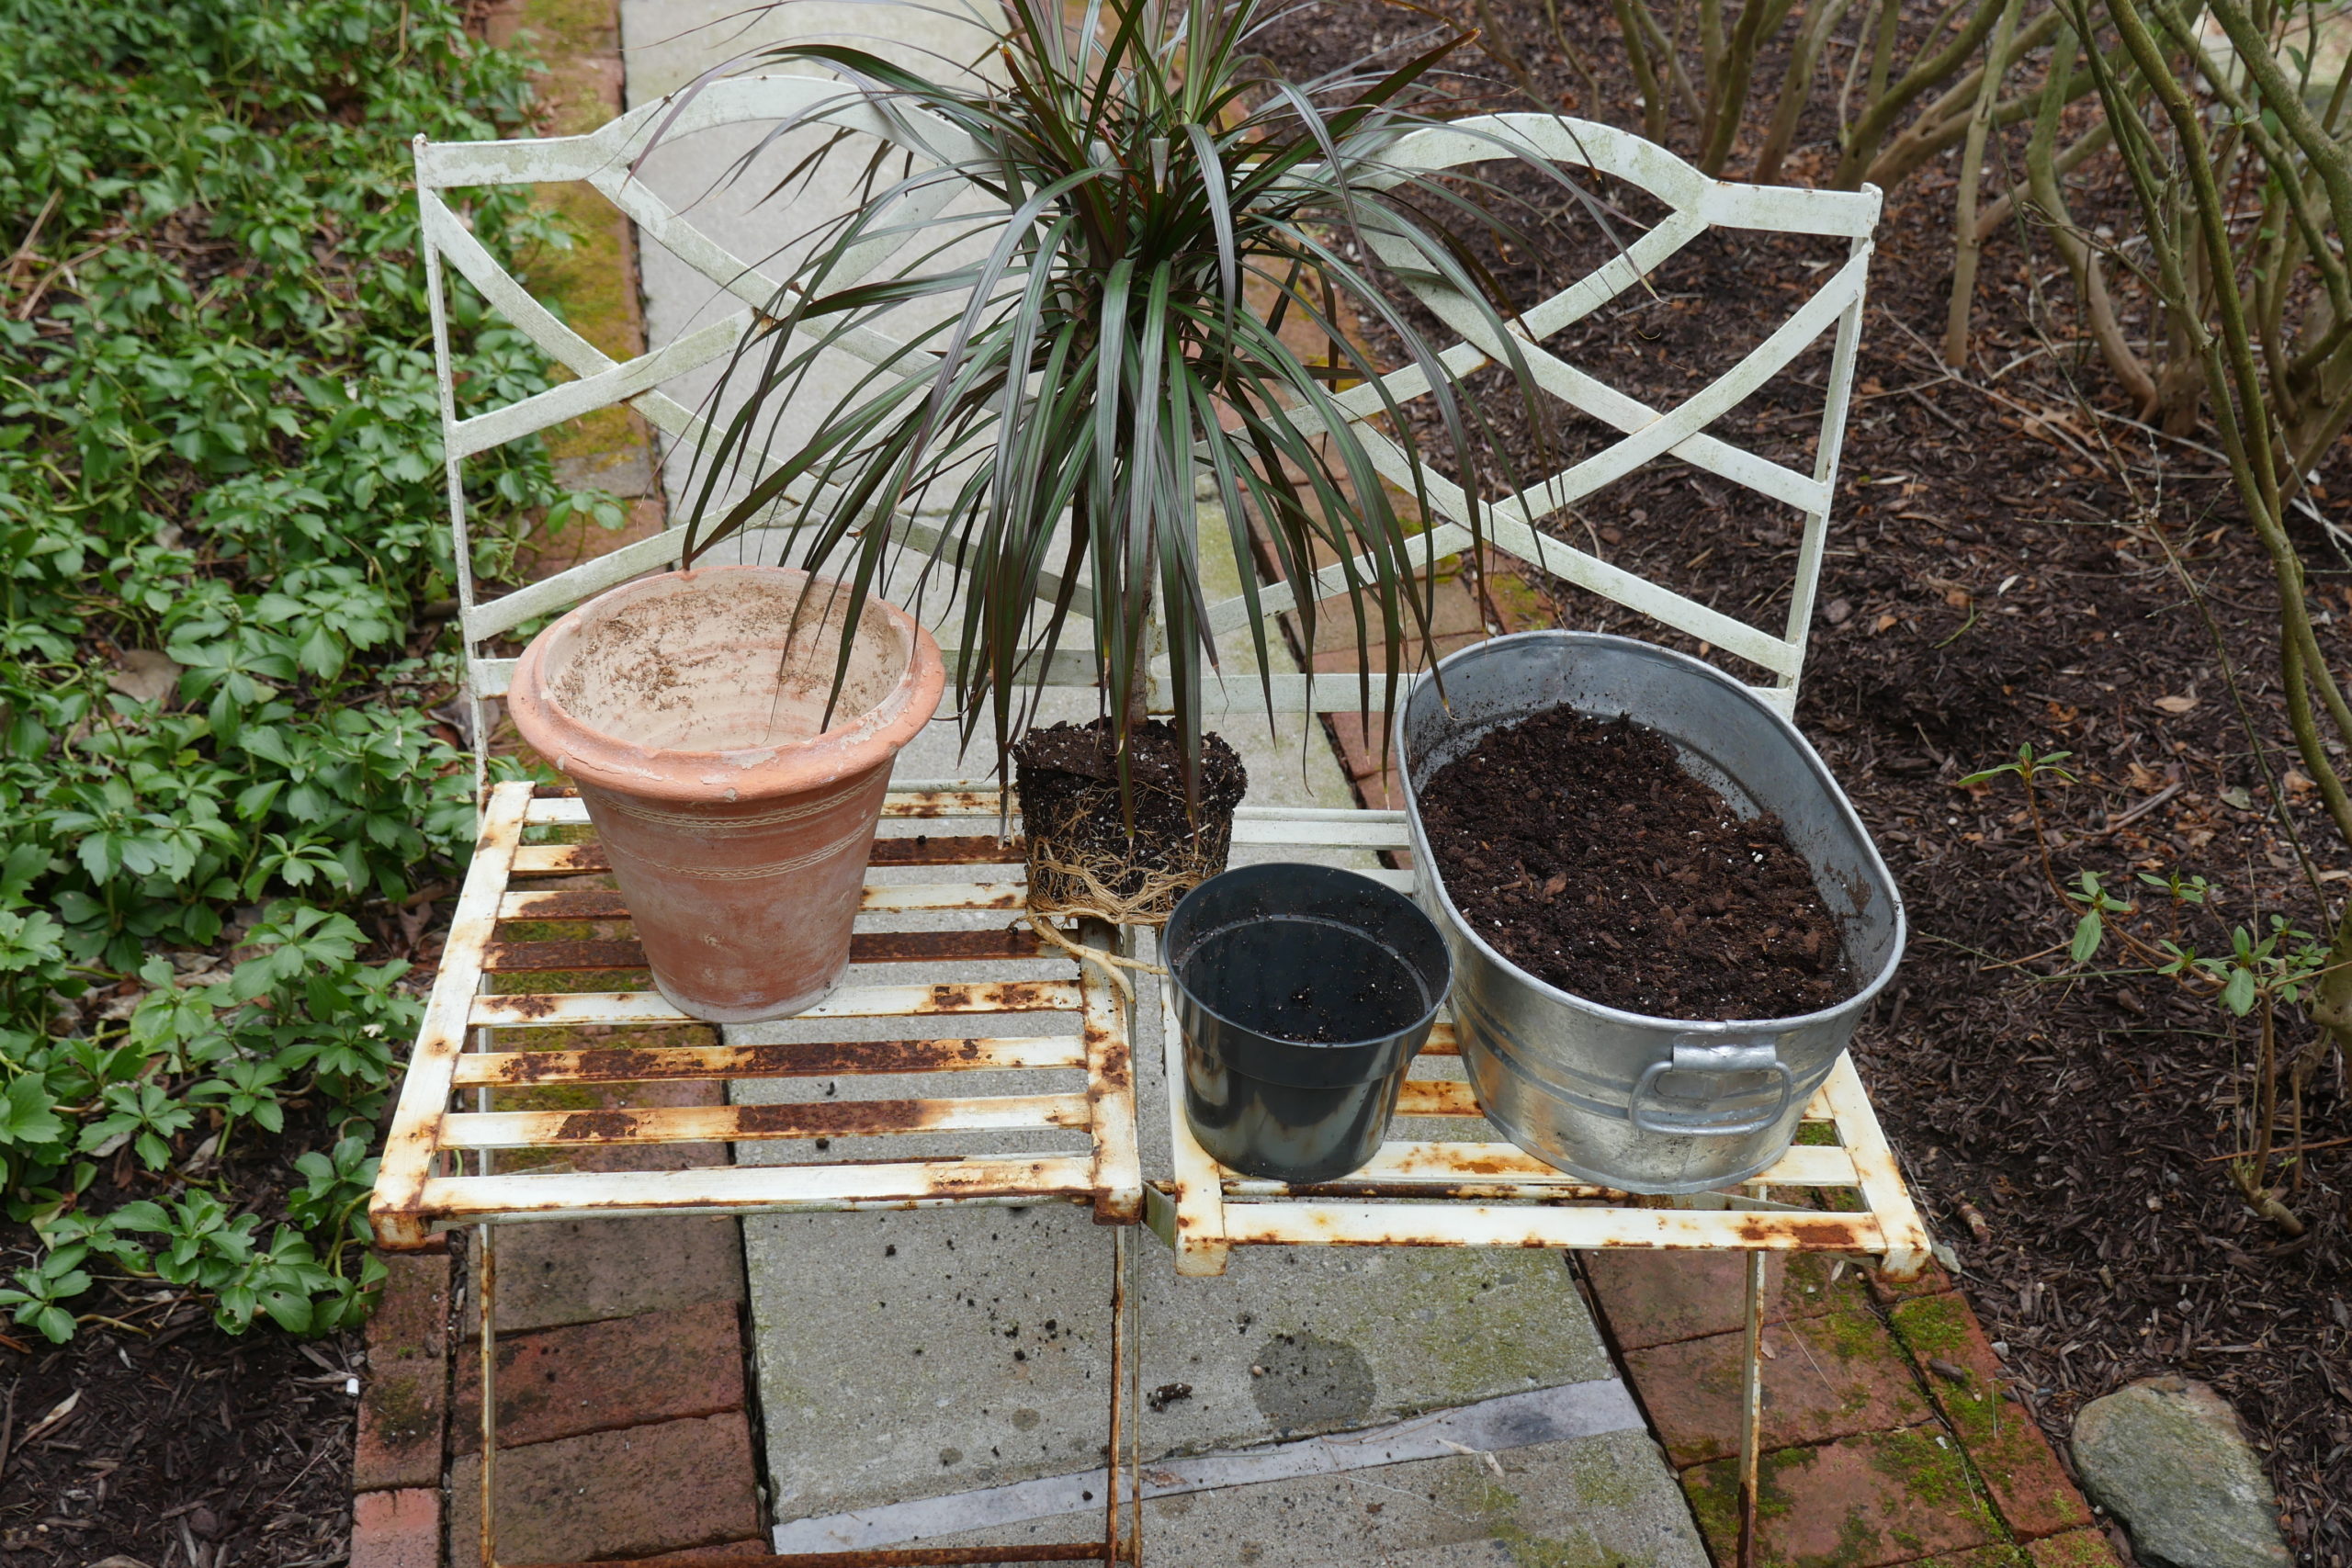 A Dracaena marginata (center) removed from its original 6-inch pot (front) being potted up into a 10-inch terracotta pot  The galvanized planter/trough (right) is used for mixing and moistening the soil. Note the roots on the Dracaena, which need to be teased out and loosened before repotting. ANDREW MESSINGER